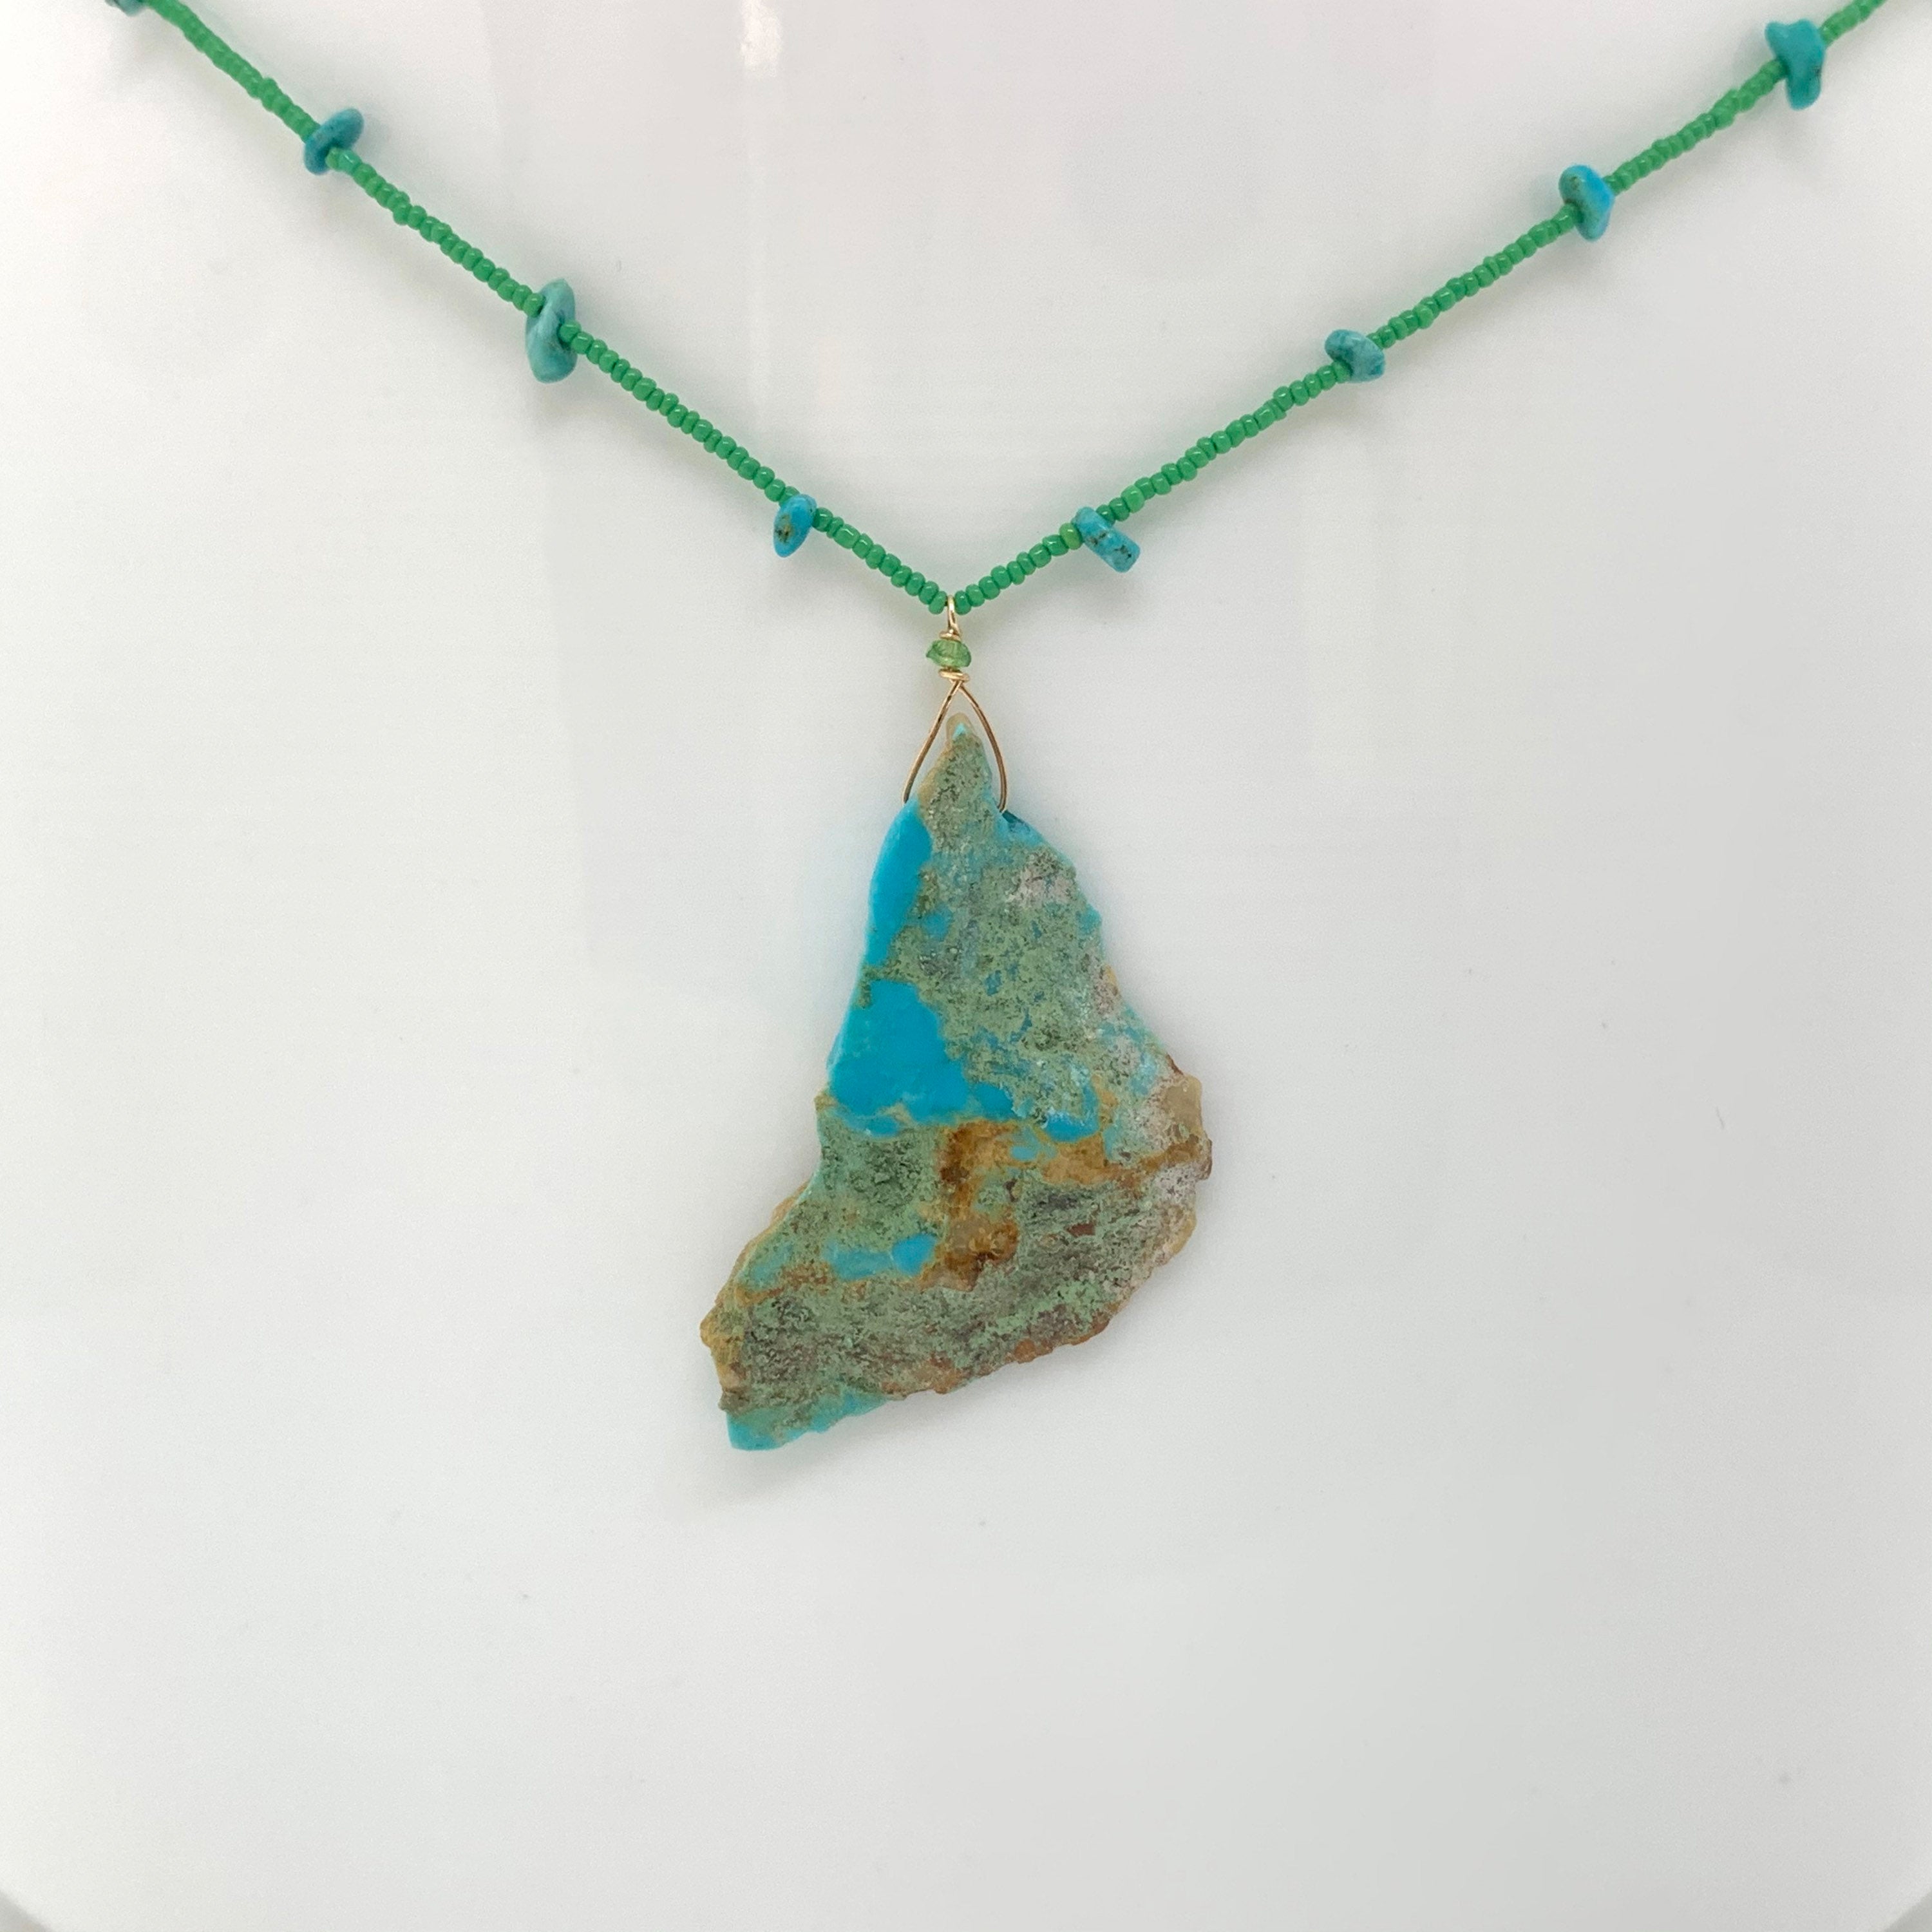 String Beaded Necklace w/ Turquoise Pendant, Turquoise Chips, Tsavorite & Antique Italian Beads